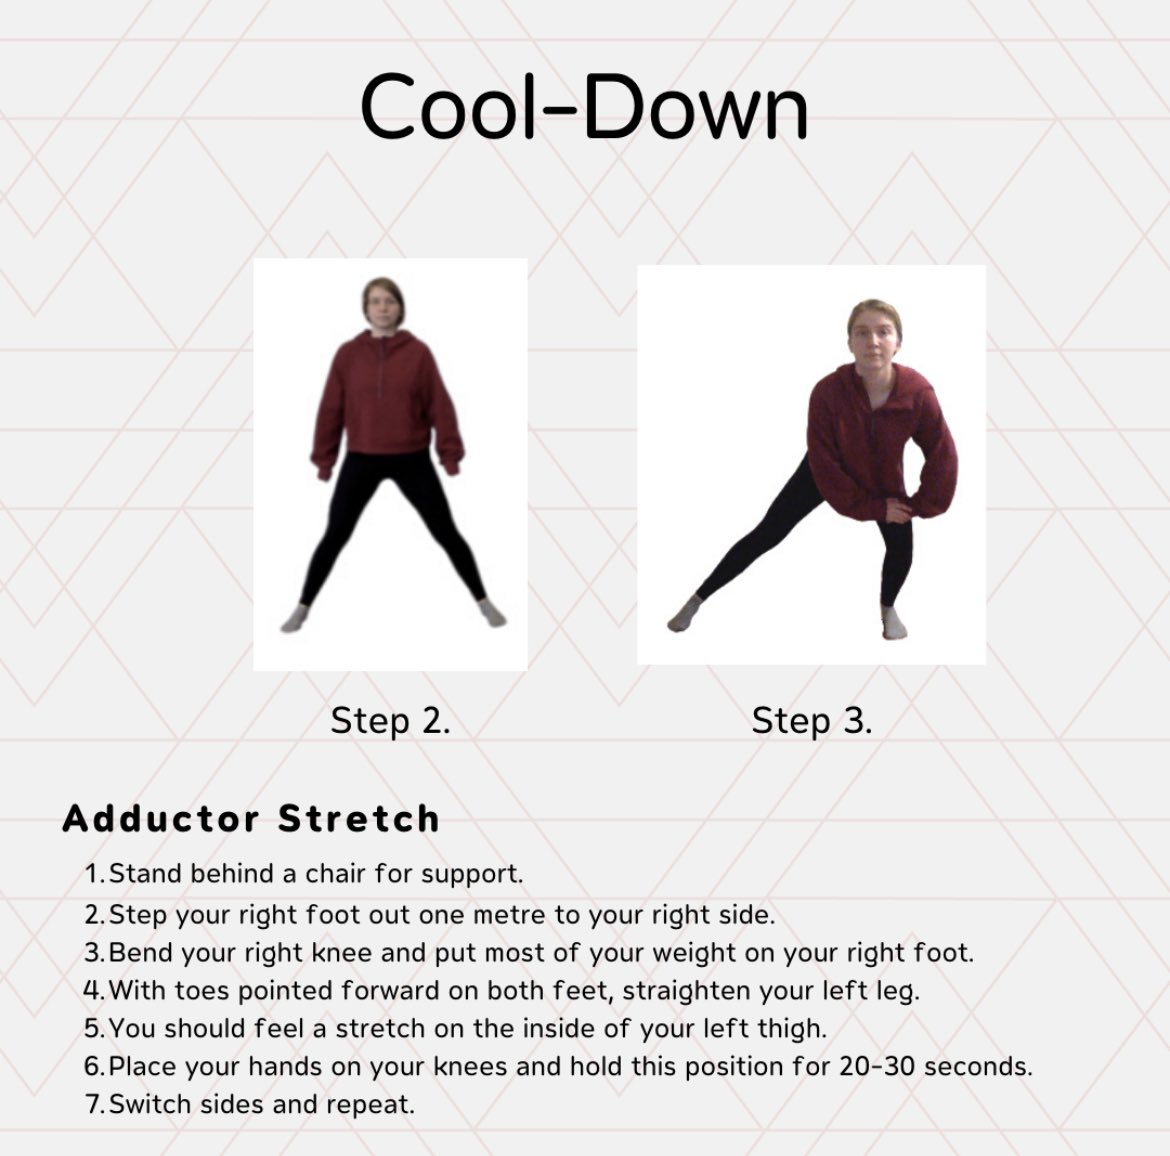 For DAY 6 of our #letsmovecanada challenge, we’ll be discussing more of the benefits of a cool-down and tips for different stretches! 

Register online at letsmovecanada.com for prizes and more! 

#ipacc
#healthyliving
#physicalactivity 
#cooldown 
#wellness 
#strava